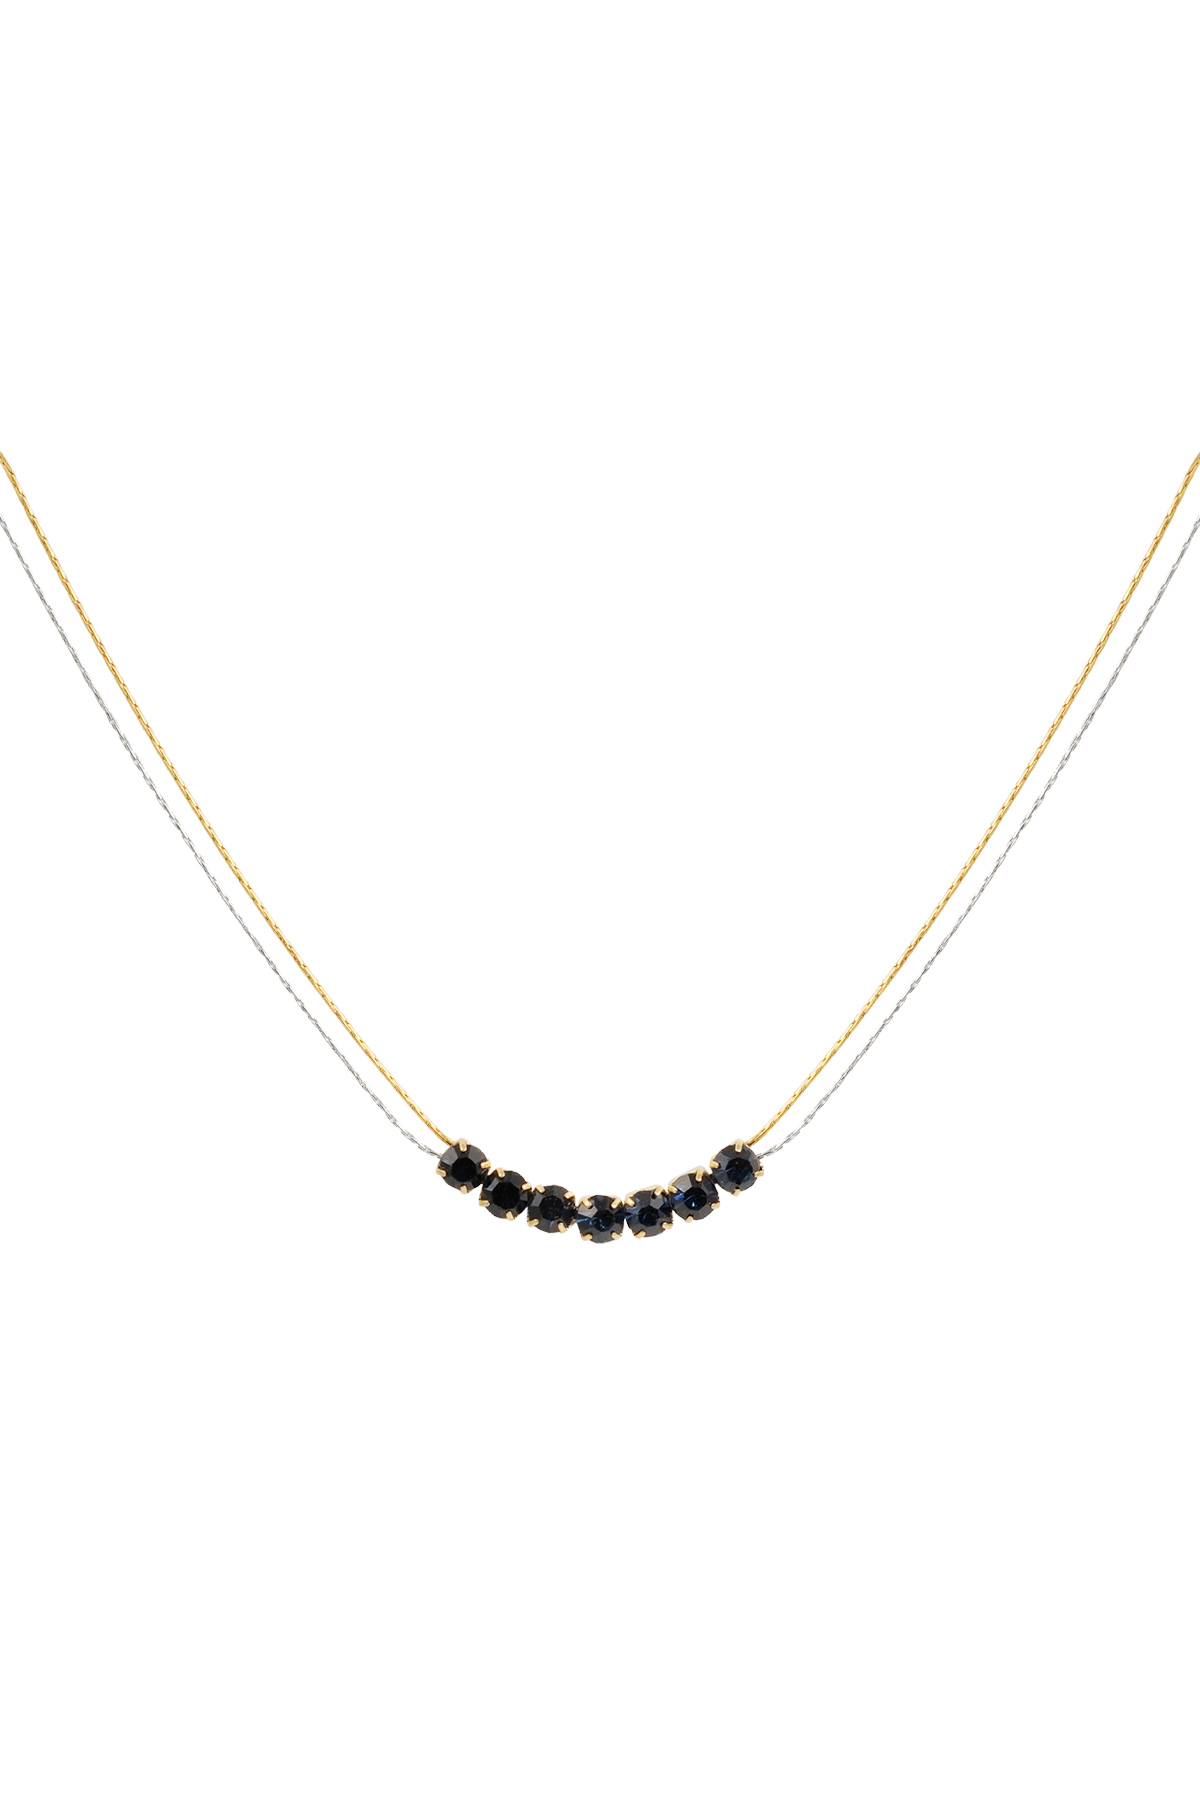 Necklace gold/silver with stone - black